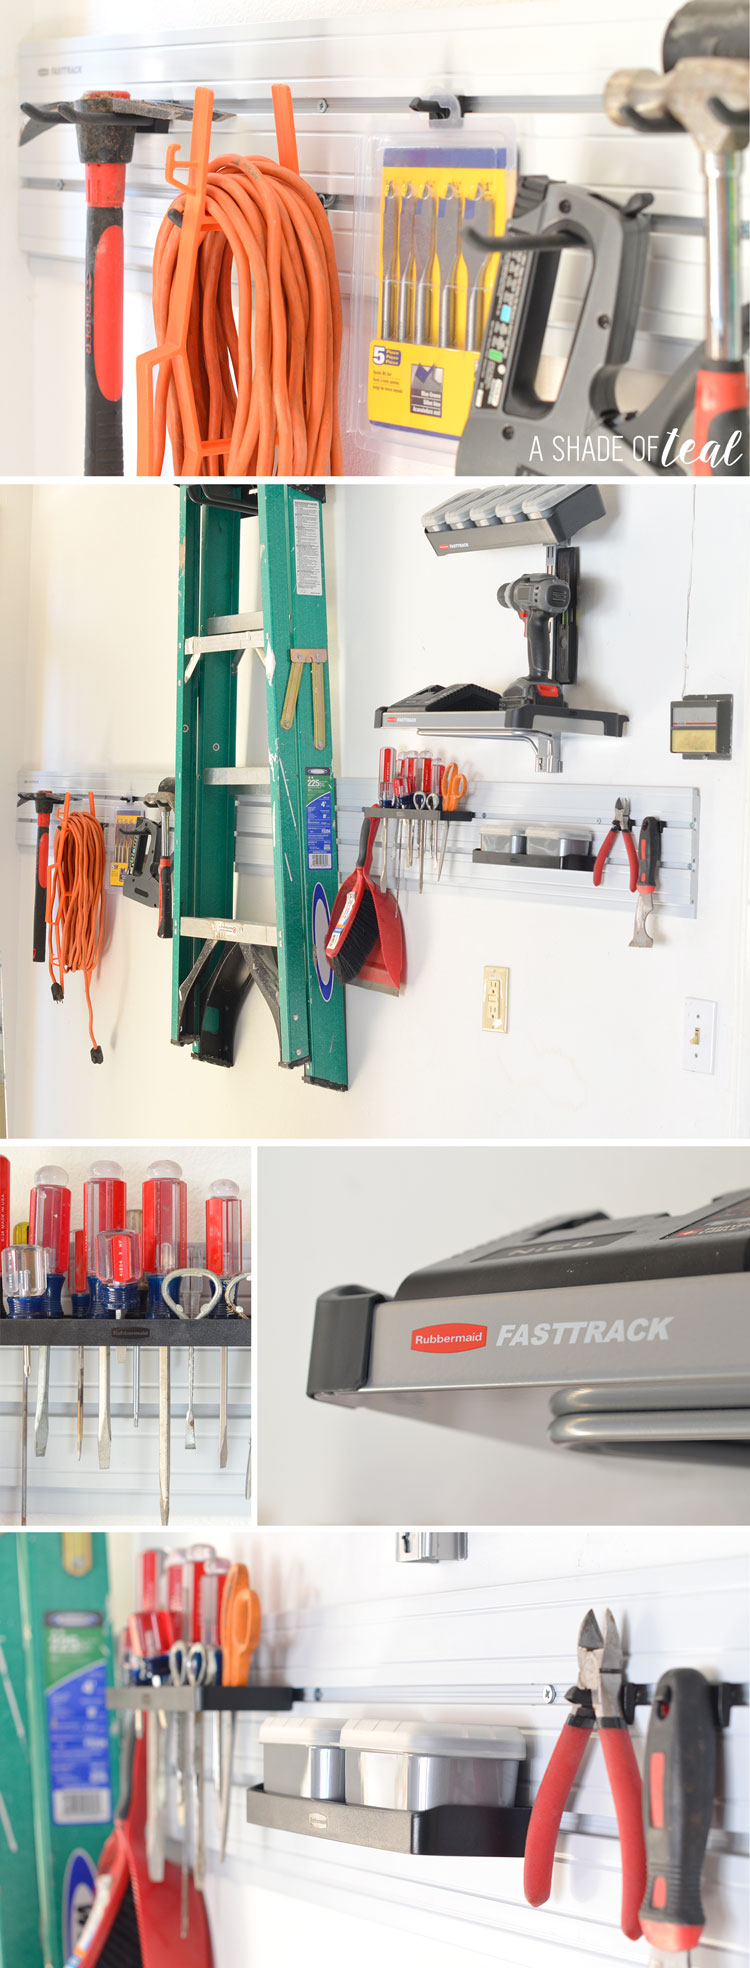 https://ashadeofteal.com/wp-content/uploads/2016/08/Garage-Organizing-with-Rubbermaid-FastTrack.71.jpg